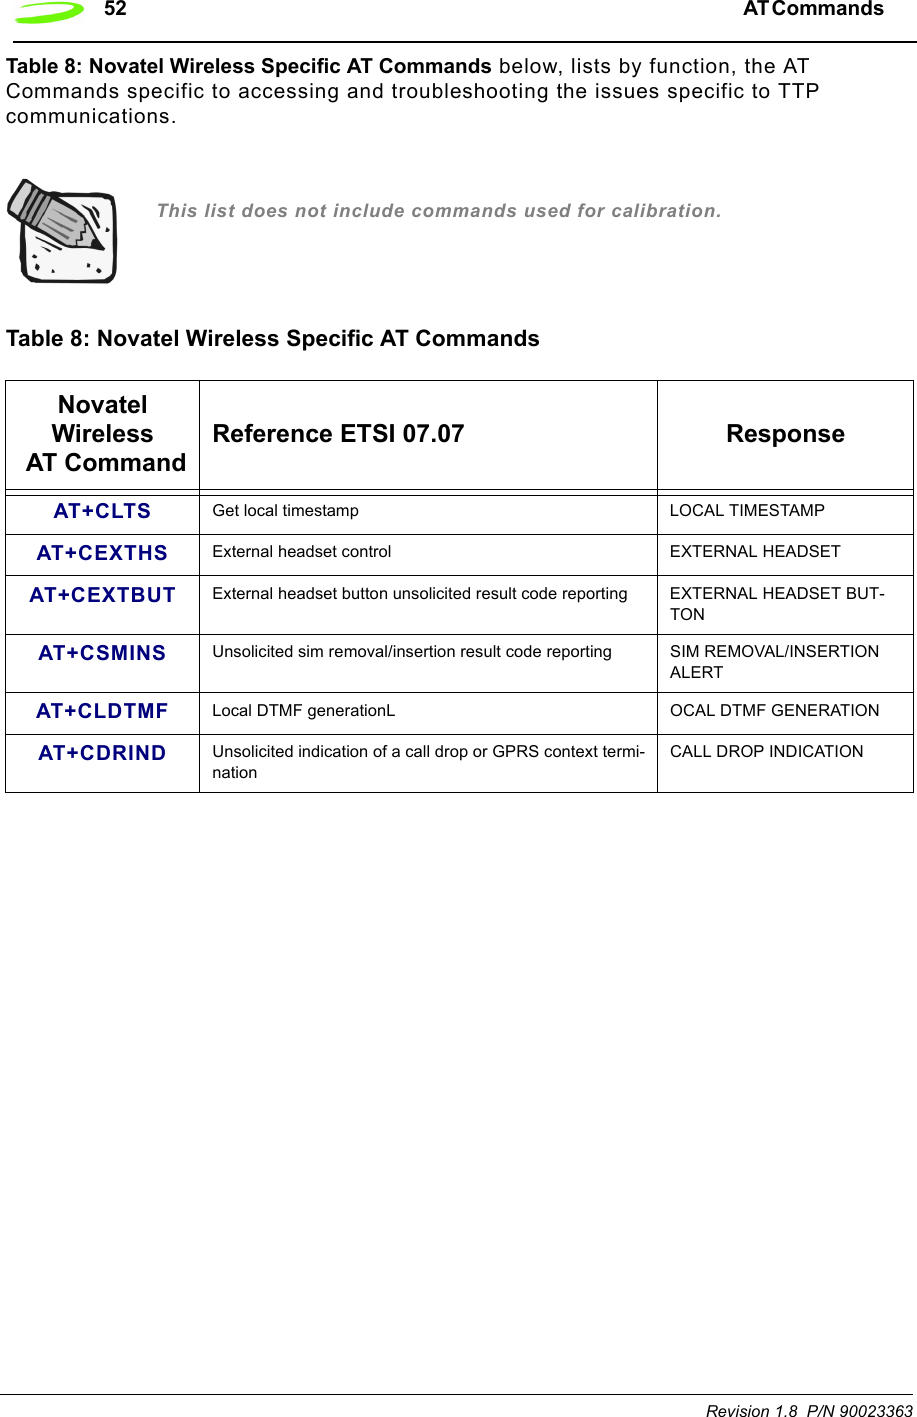 52 AT Commands  Revision 1.8  P/N 90023363Table 8: Novatel Wireless Specific AT Commands below, lists by function, the AT Commands specific to accessing and troubleshooting the issues specific to TTP communications.This list does not include commands used for calibration.Table 8: Novatel Wireless Specific AT CommandsNovatel Wireless AT CommandReference ETSI 07.07 ResponseAT+CLTS Get local timestamp LOCAL TIMESTAMPAT+CEXTHS External headset control EXTERNAL HEADSETAT+CEXTBUT External headset button unsolicited result code reporting EXTERNAL HEADSET BUT-TONAT+CSMINS Unsolicited sim removal/insertion result code reporting SIM REMOVAL/INSERTION ALERTAT+CLDTMF Local DTMF generationL OCAL DTMF GENERATIONAT+CDRIND Unsolicited indication of a call drop or GPRS context termi-nation CALL DROP INDICATION